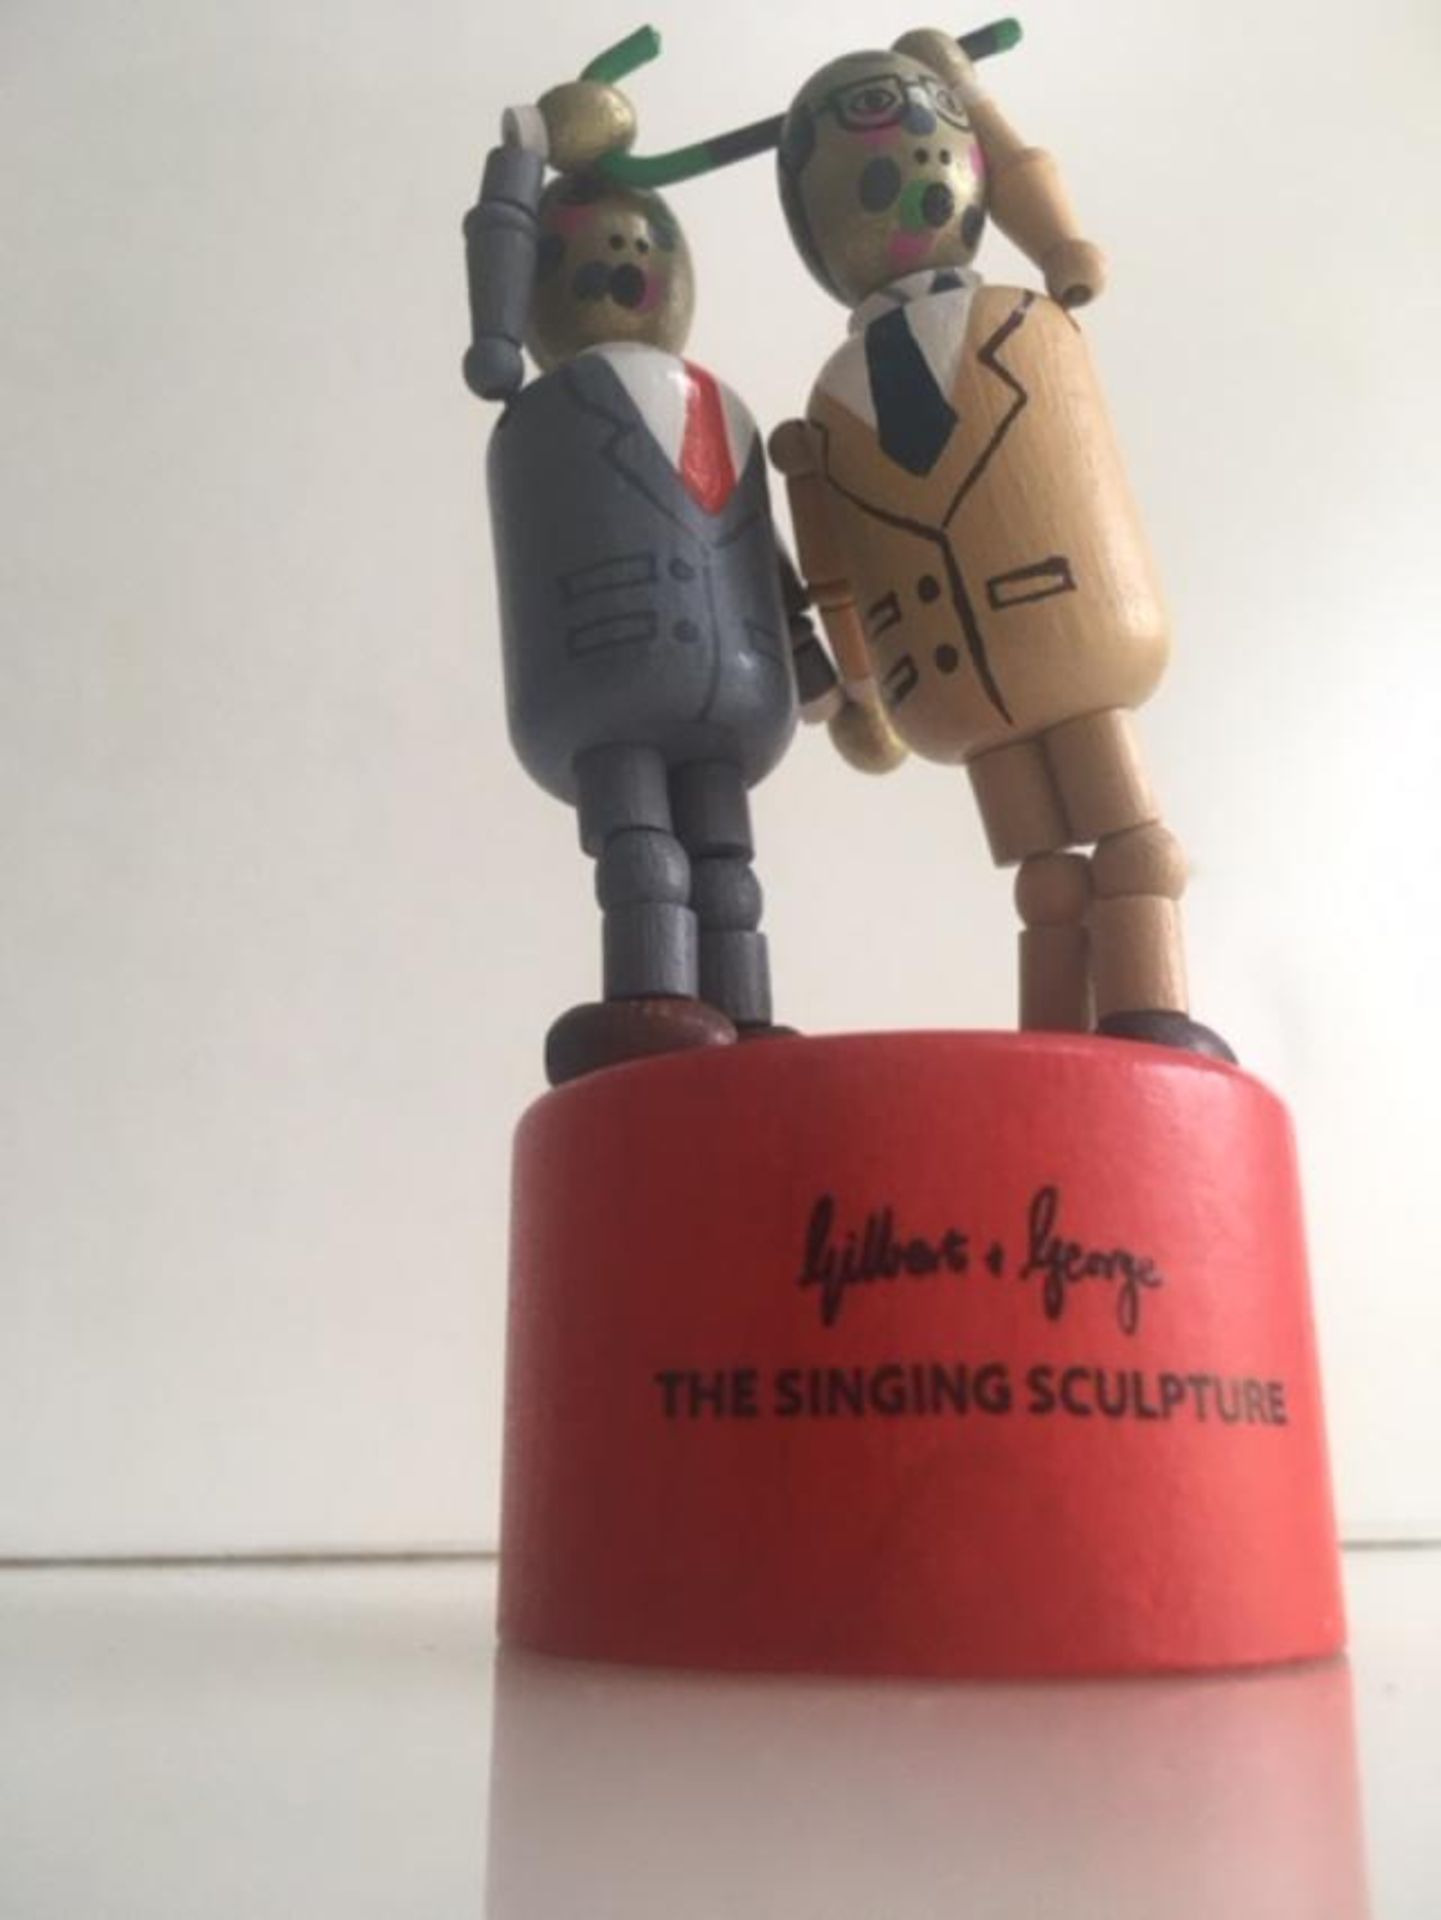 Gilbert & George (B.1943 & 42) Wooden Maquette, The Singing Sculpture, Limited Edition, 1969 - Image 8 of 9